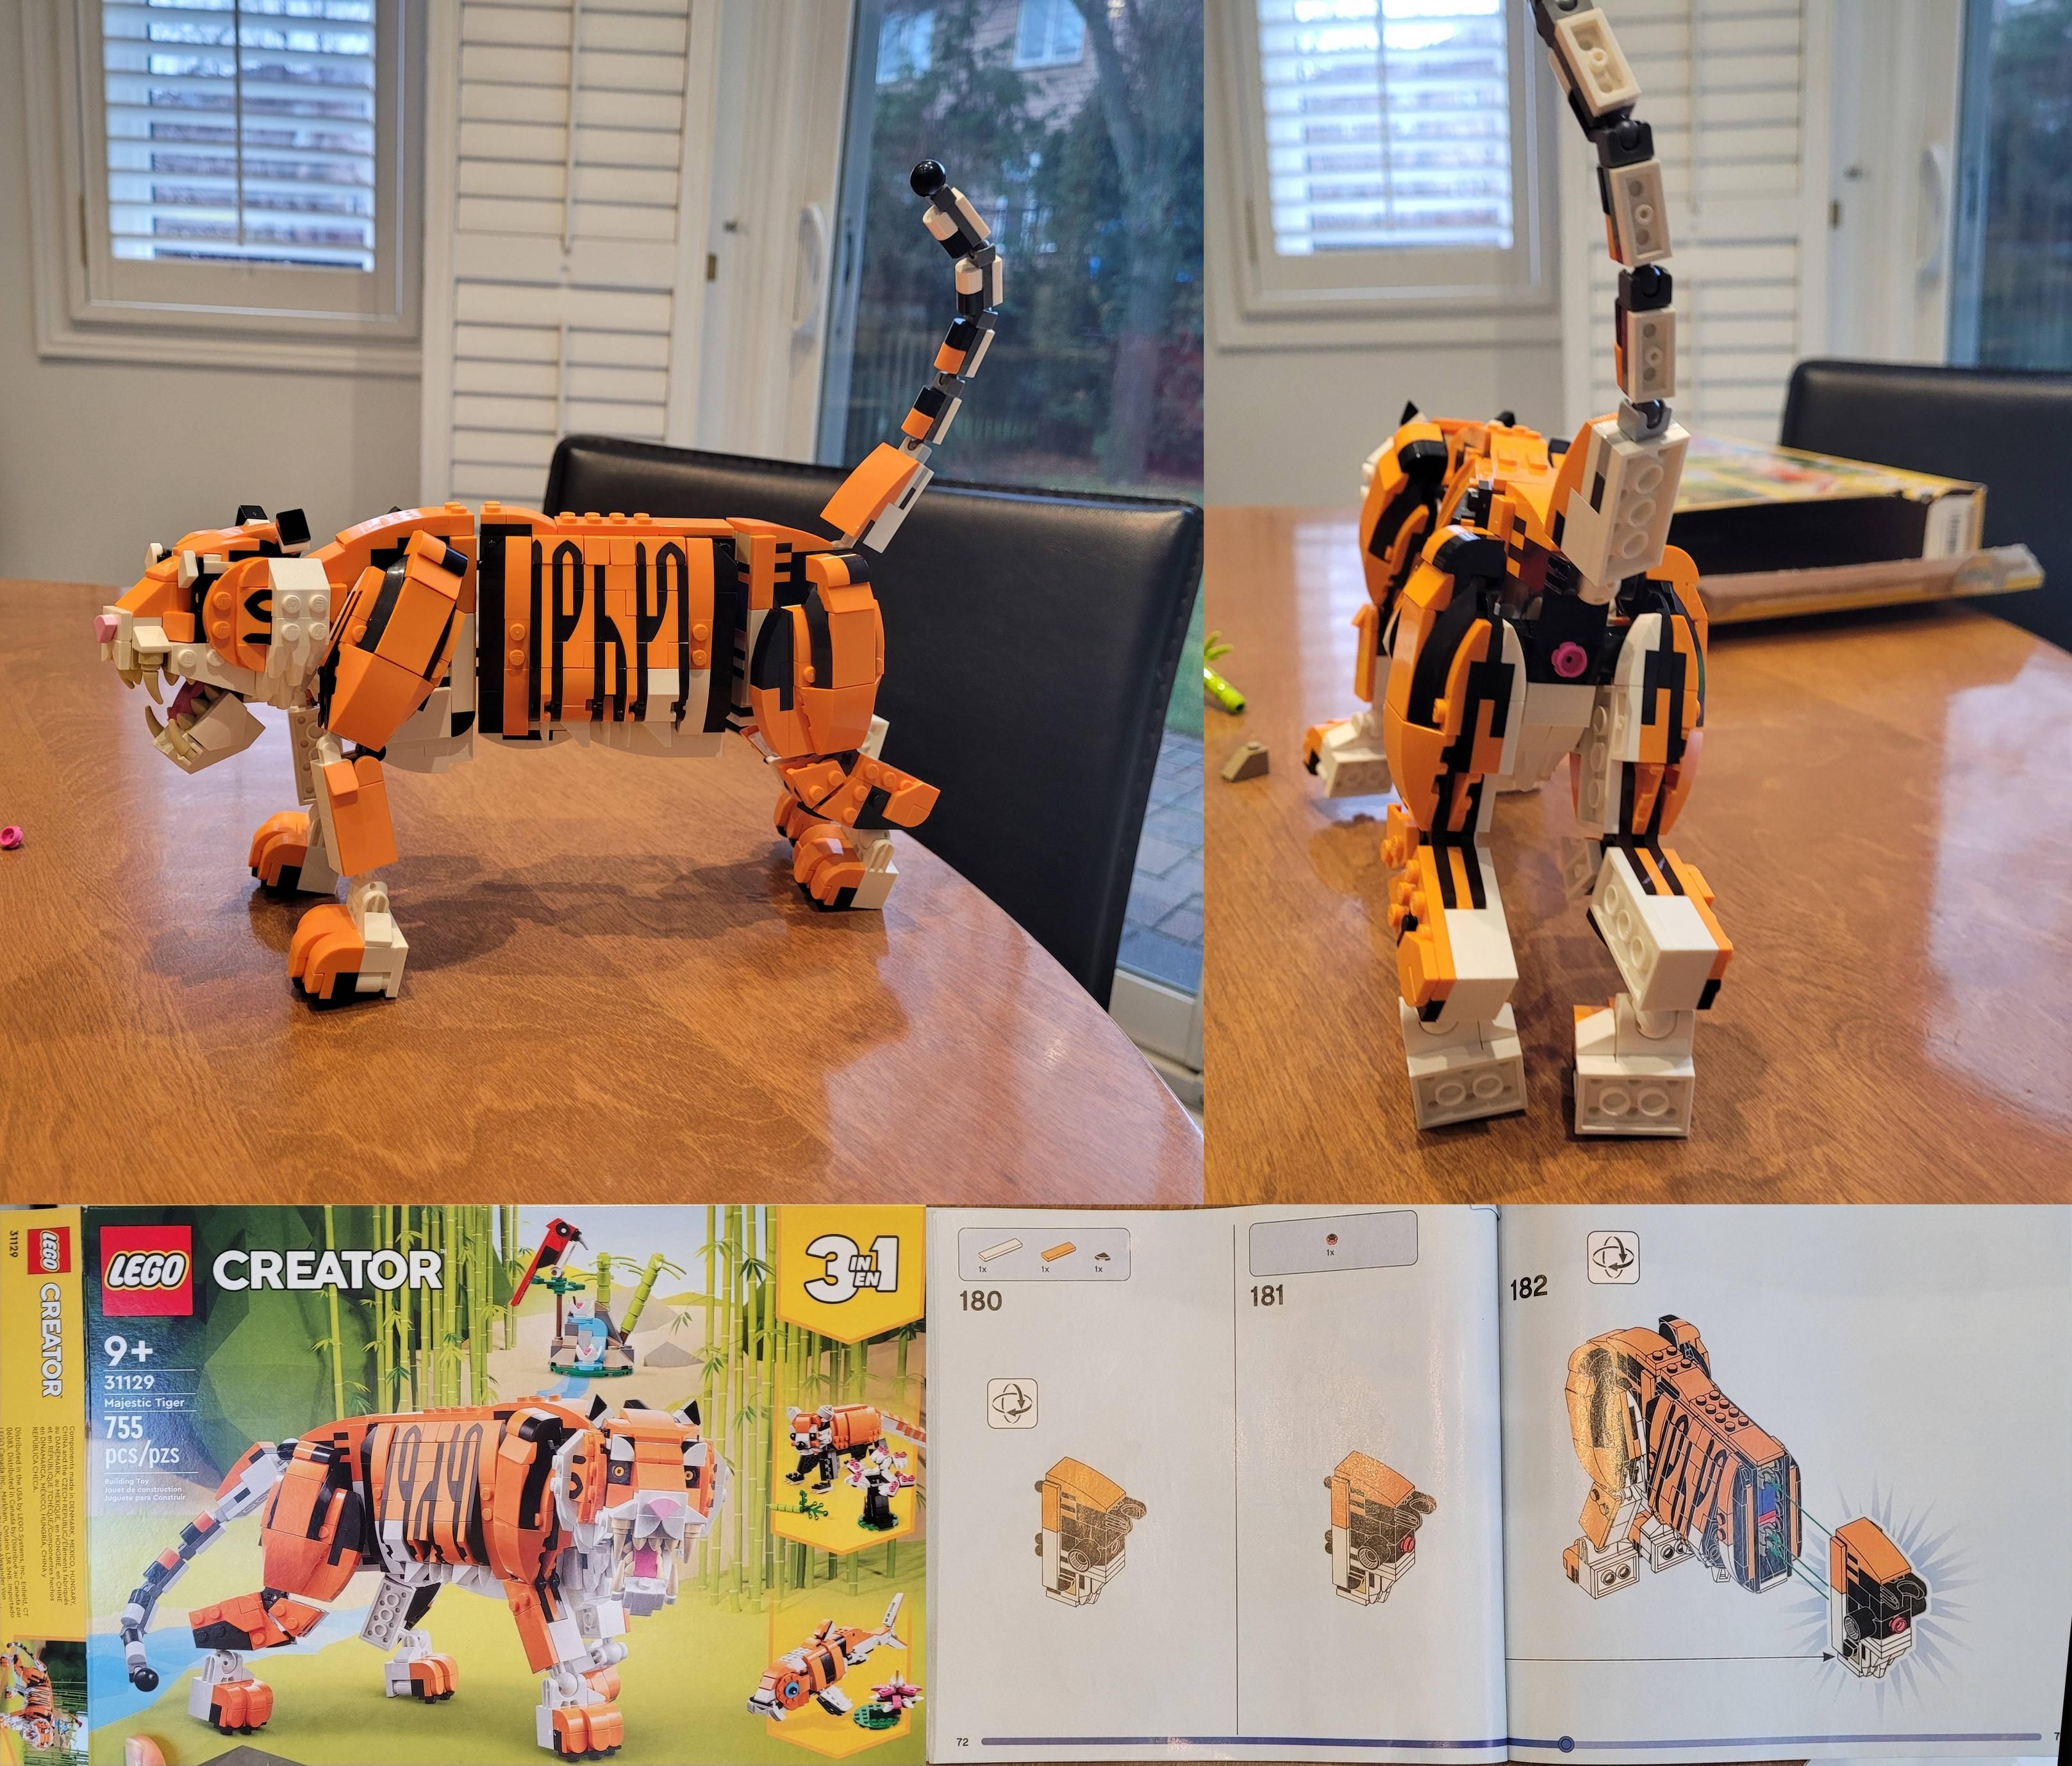 So I thought it was a joke but the Lego instructions for Majestic Tiger include a pink, prolapsed butthole